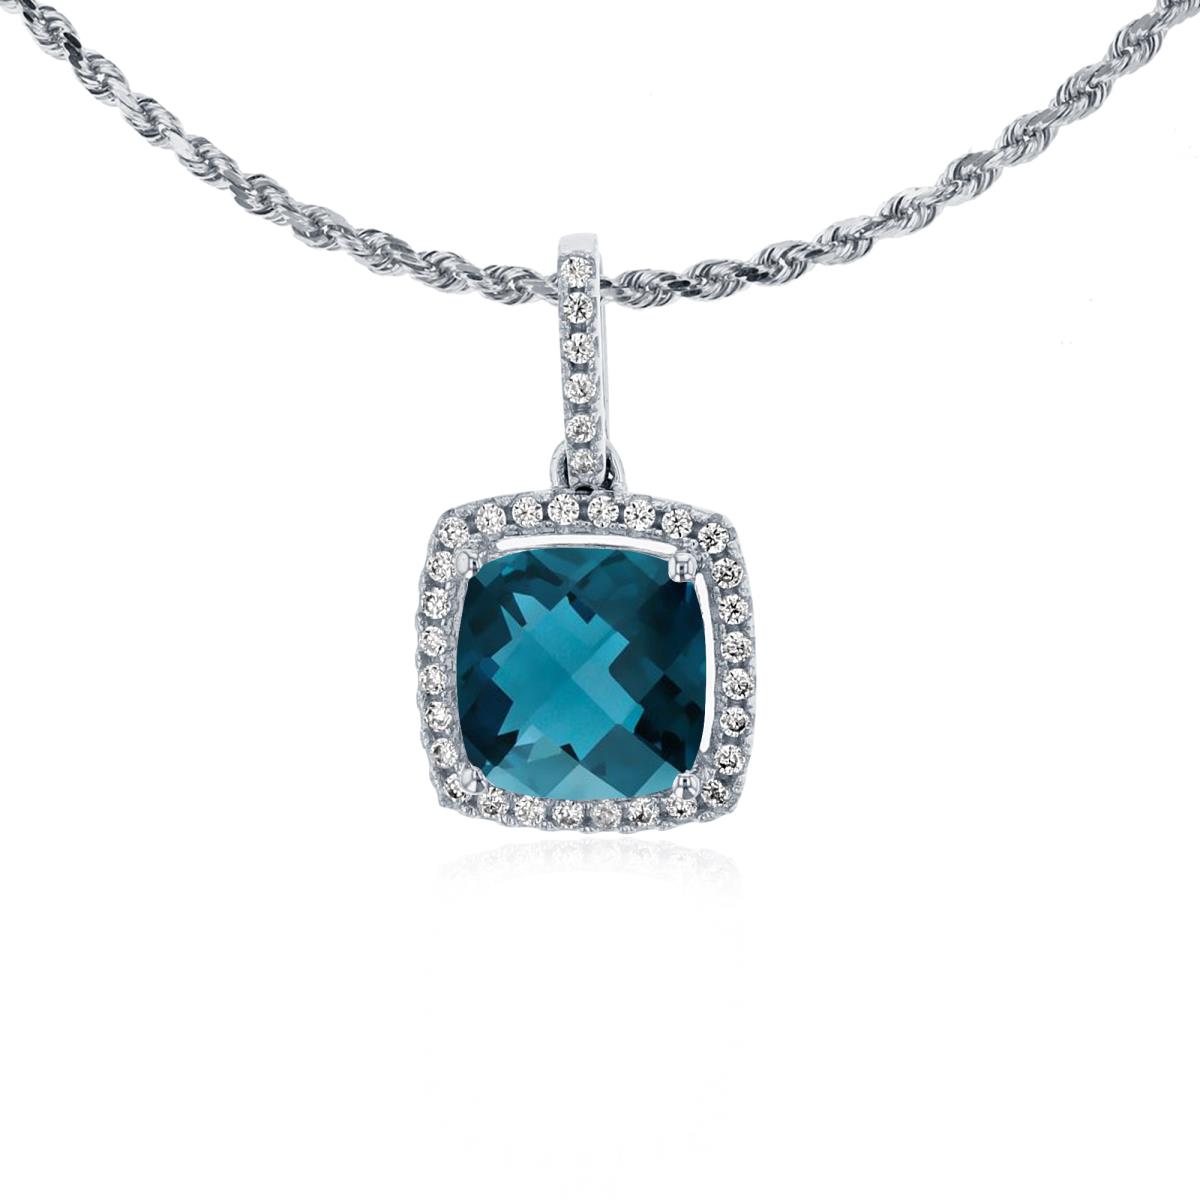 10K White Gold 7mm Cushion London Blue Topaz & 0.14 CTTW Rnd Diamond Halo 18" Rope Chain Necklace